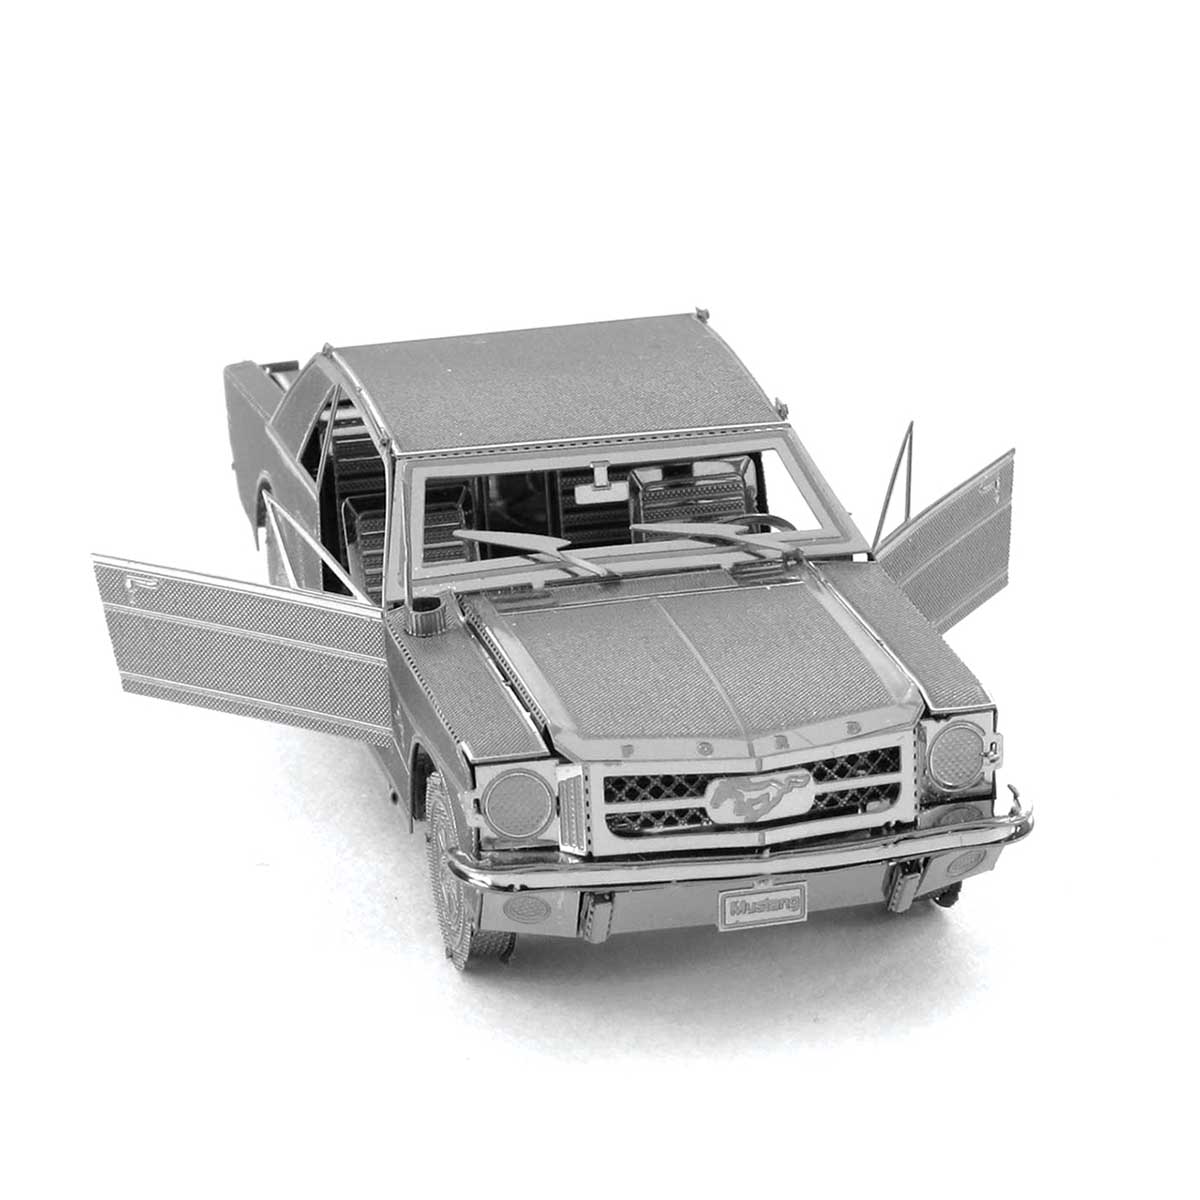 Ford 1965 Mustang Coupe Car 3D Puzzle